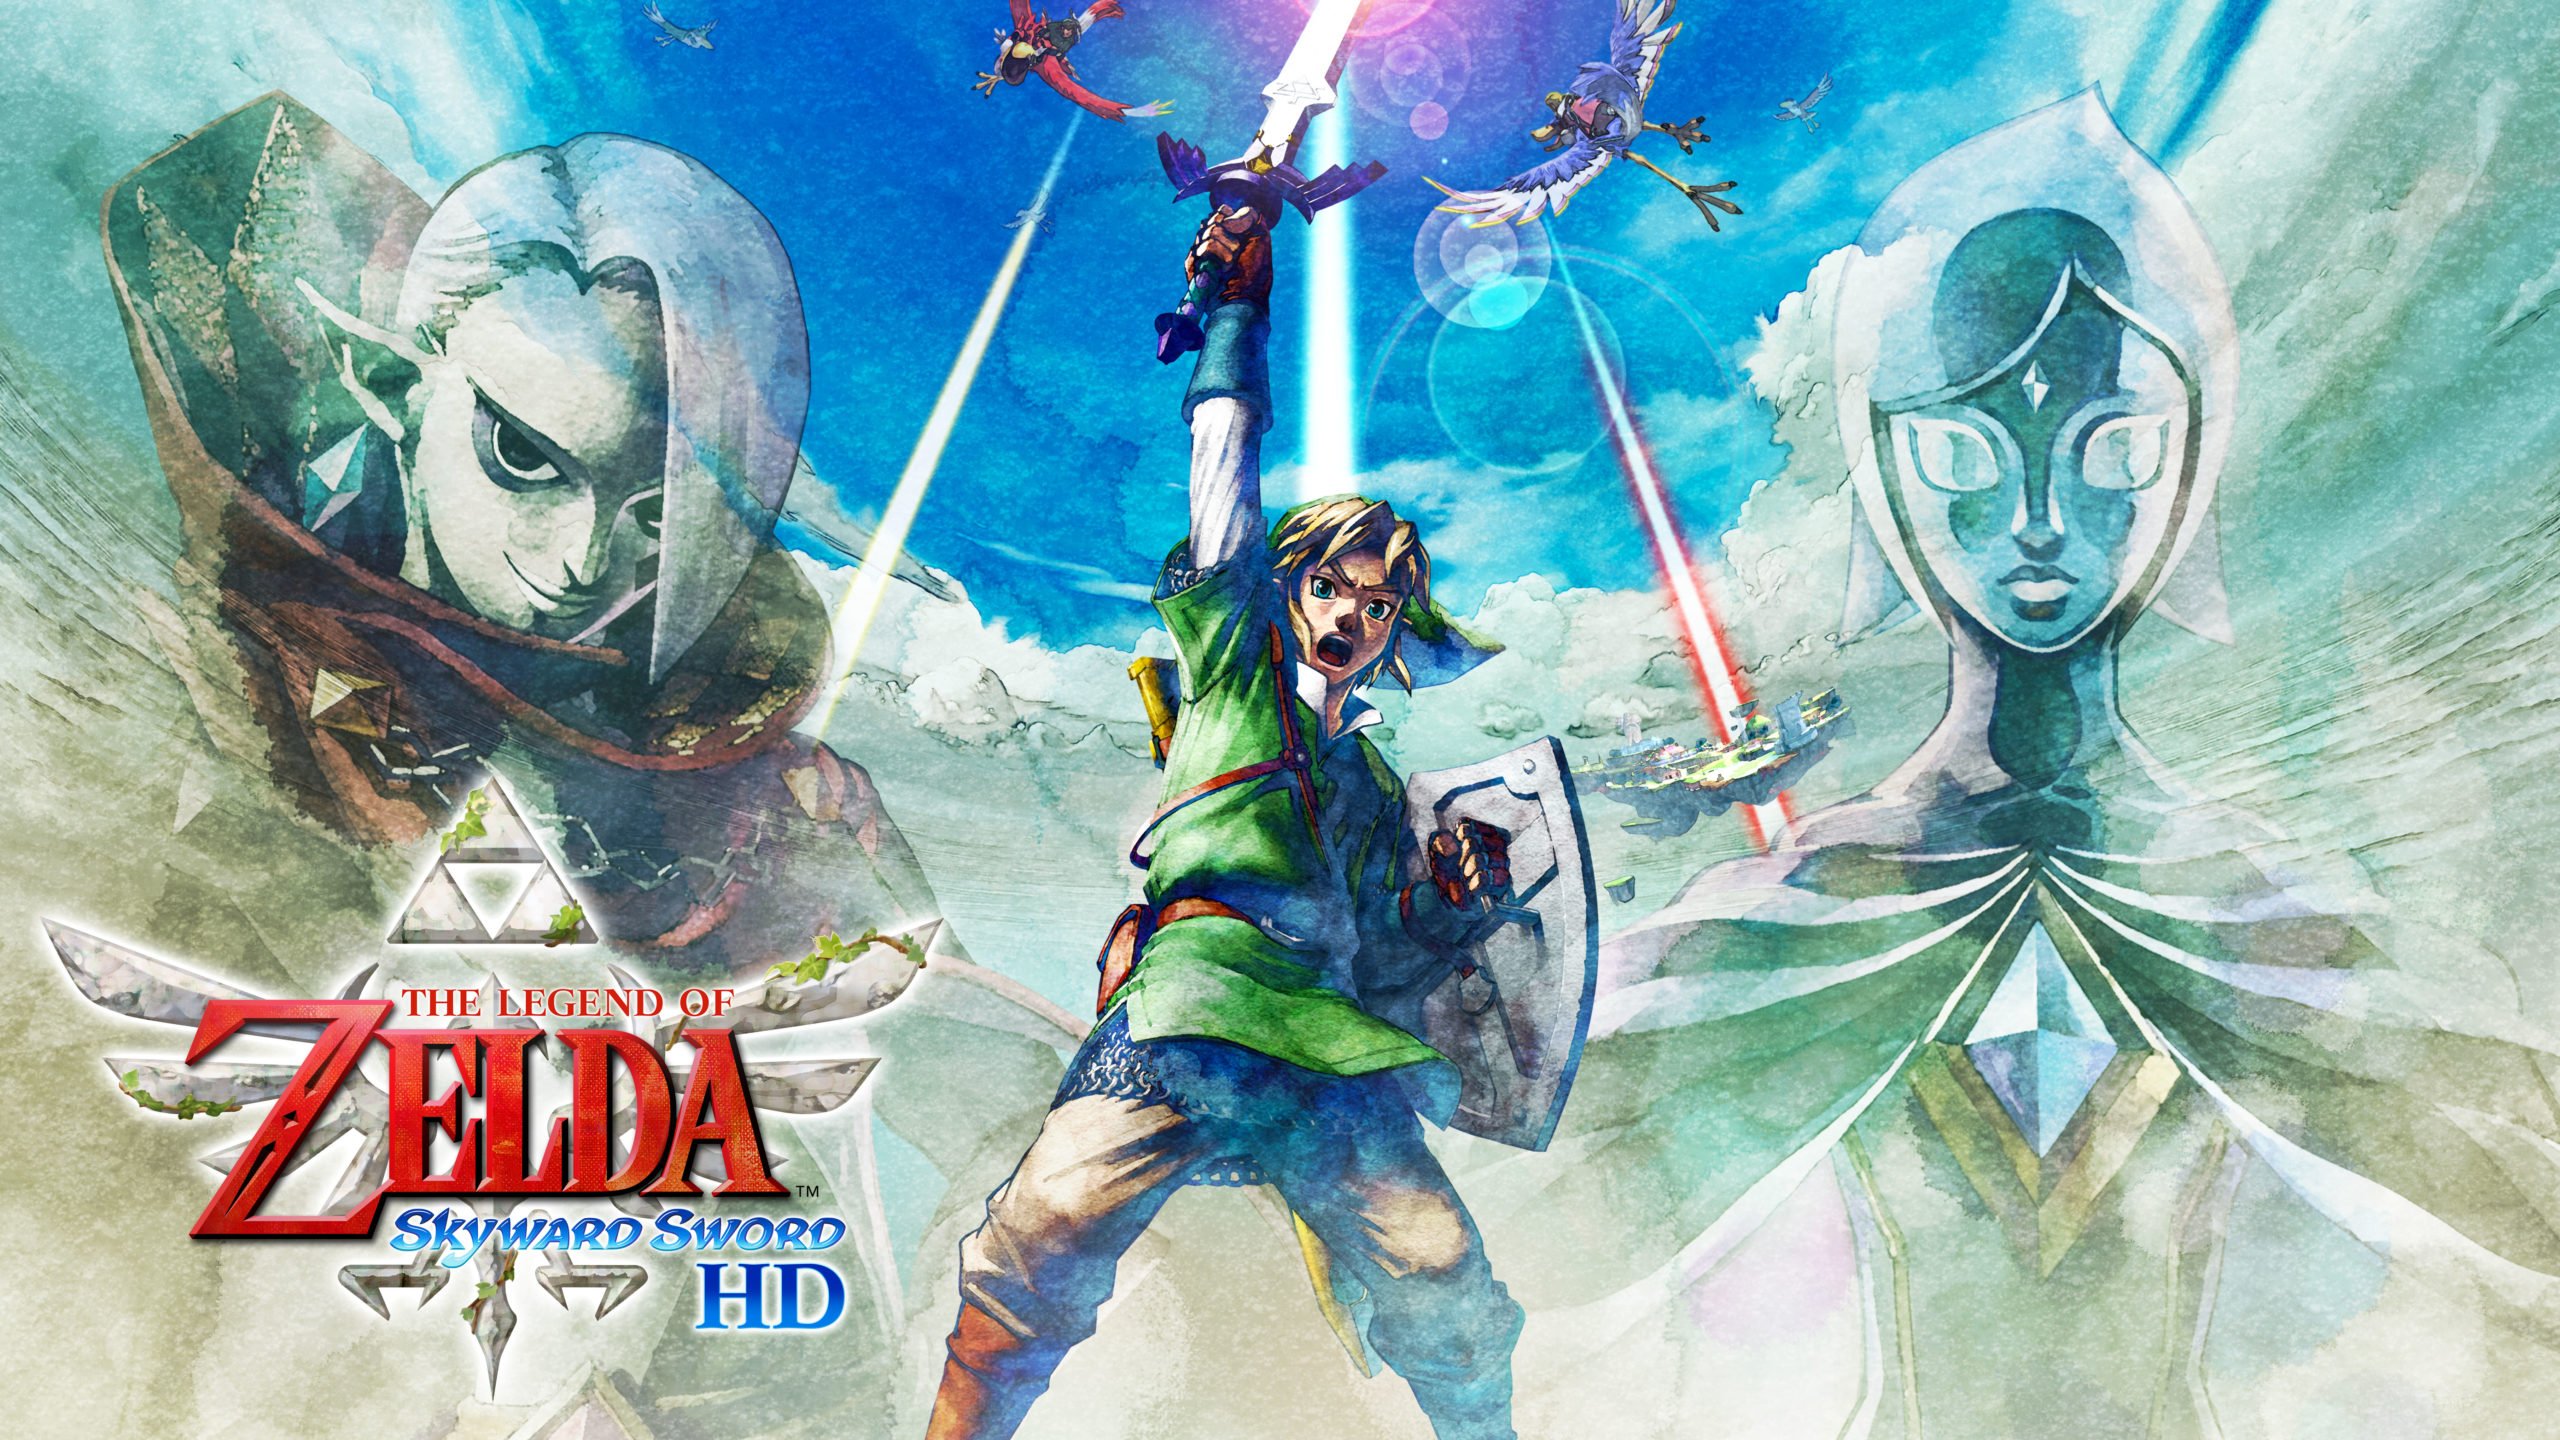 Zelda: Skyward Sword is coming to change with 60fps graphics and new controls